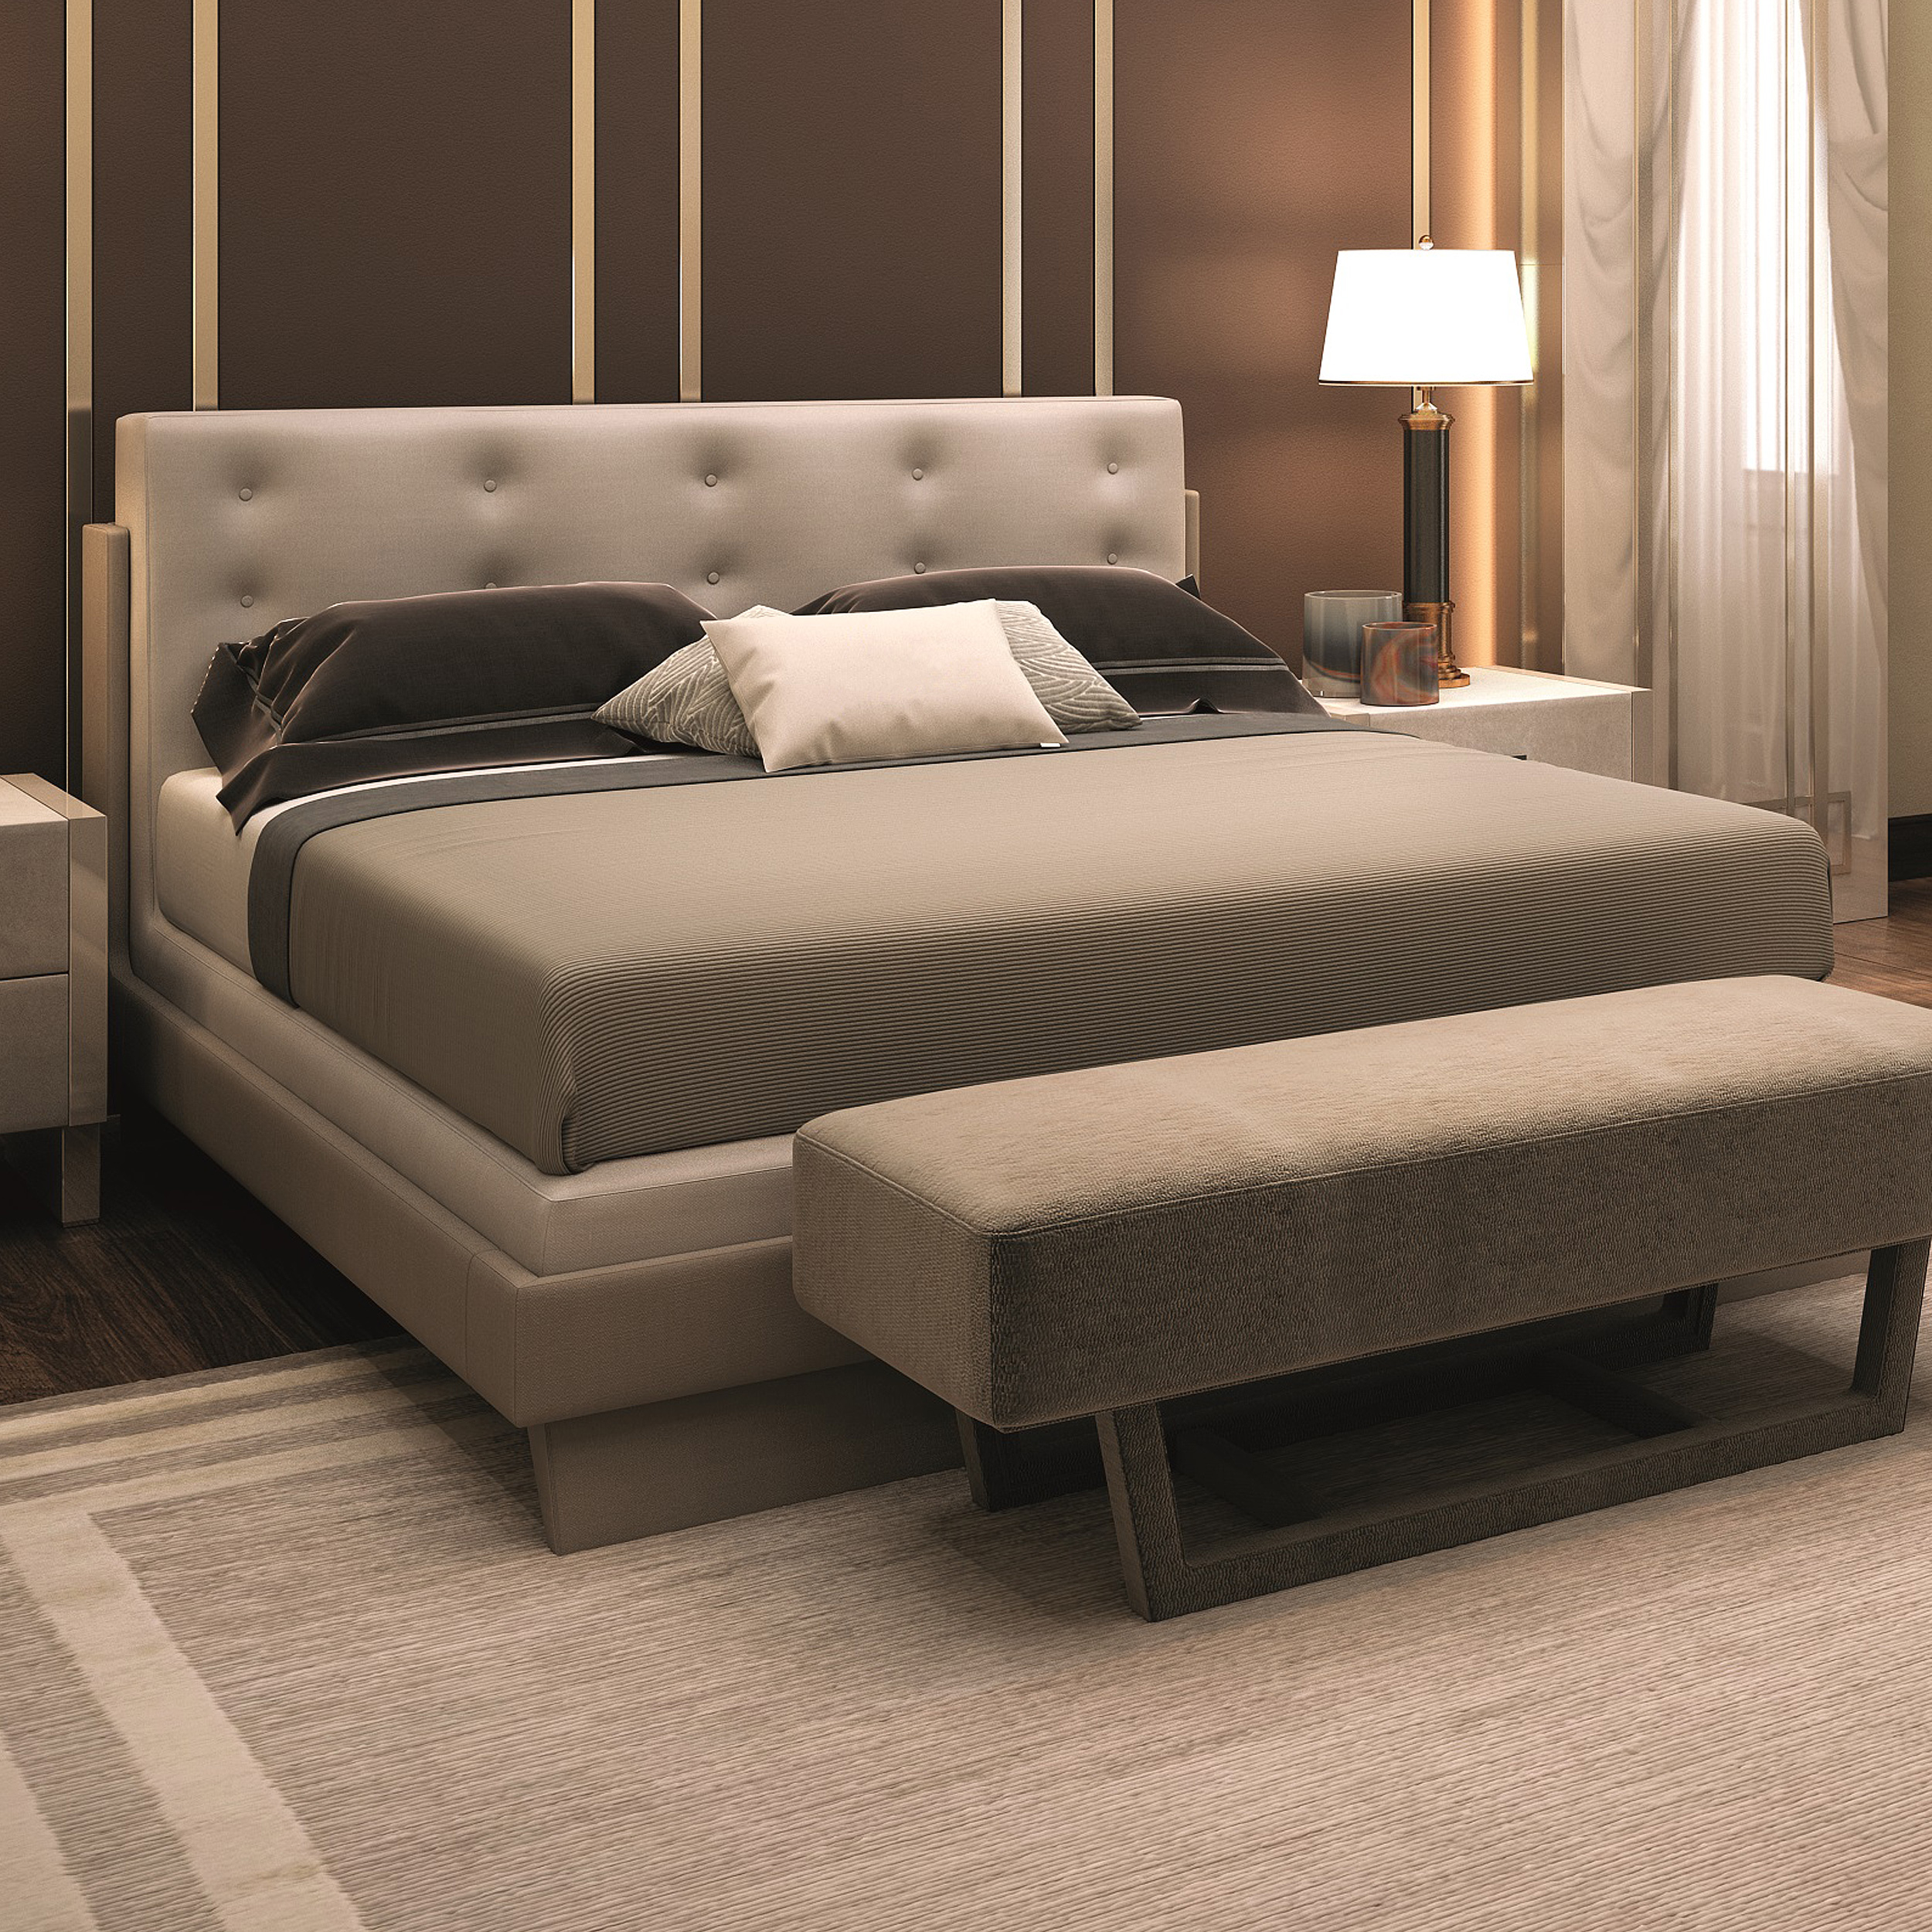 High-End Exclusive Italian Bed